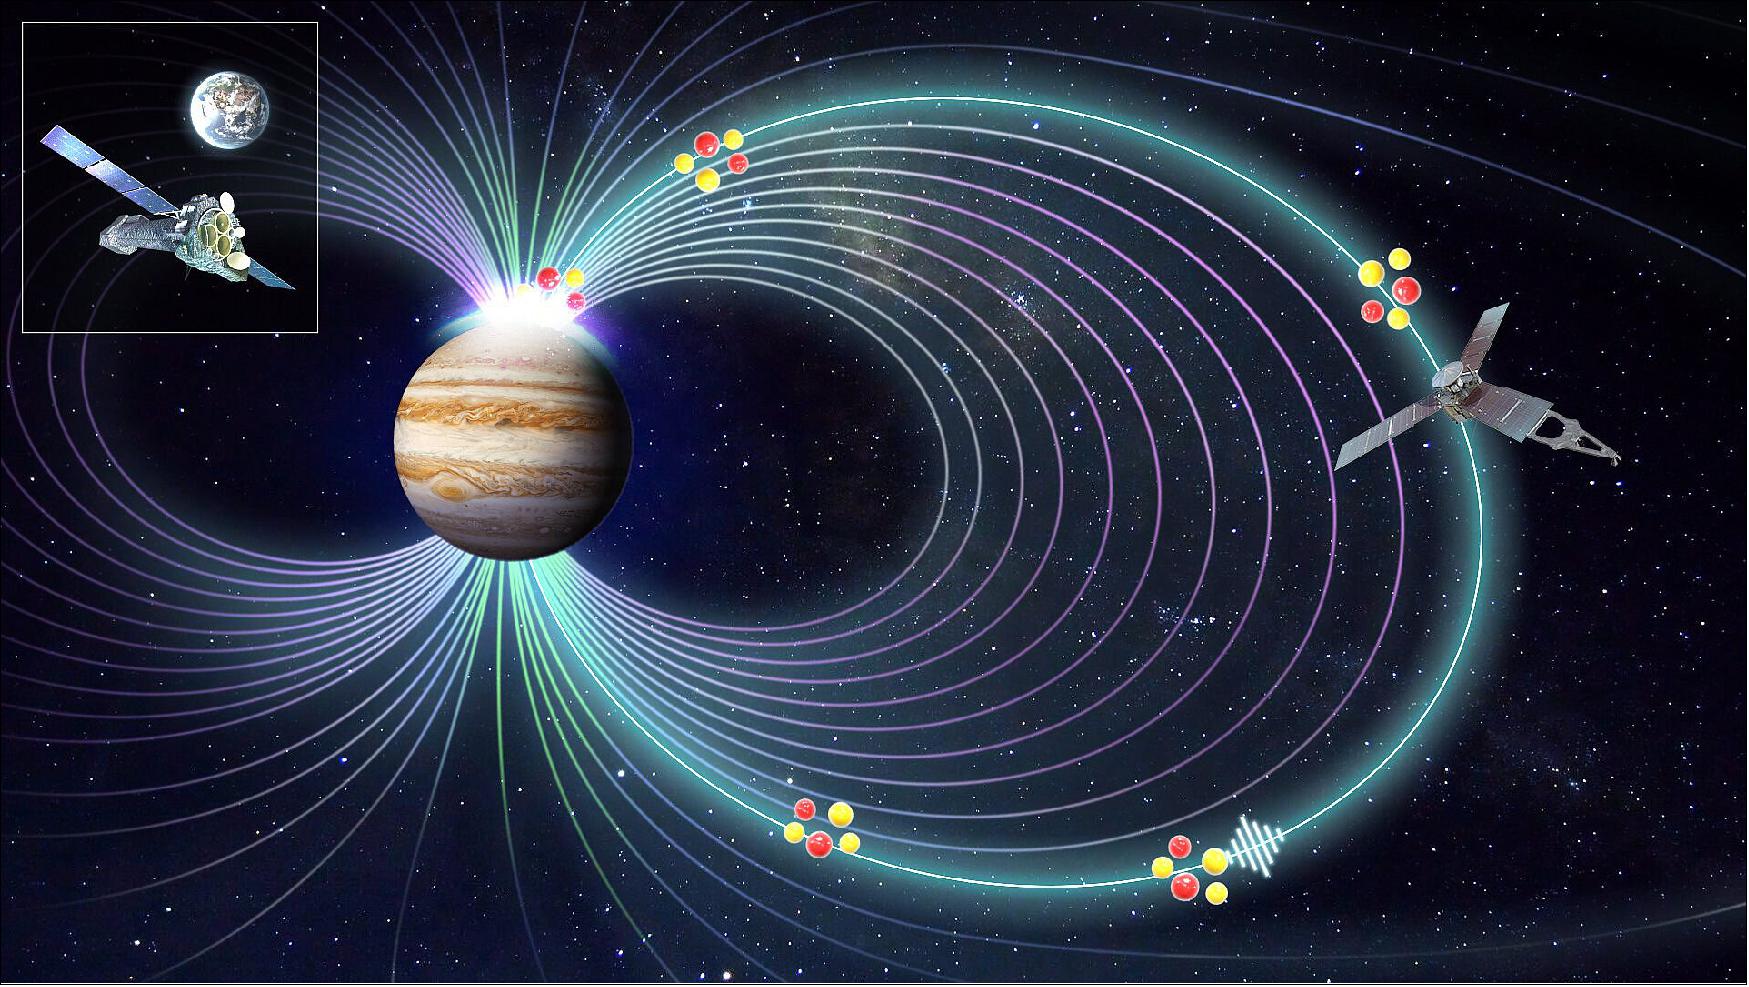 Figure 24: Jupiter’s mysterious X-ray auroras have been explained, ending a 40-year quest for an answer. For the first time, astronomers have seen the way Jupiter’s magnetic field is compressed, which heats the particles and directs them along the magnetic field lines down into the atmosphere of Jupiter, sparking the X-ray aurora. The connection was made by combining in-situ data from NASA’s Juno mission with X-ray observations from ESA’s XMM-Newton (image credit: Yao/Dunn/ESA/NASA)